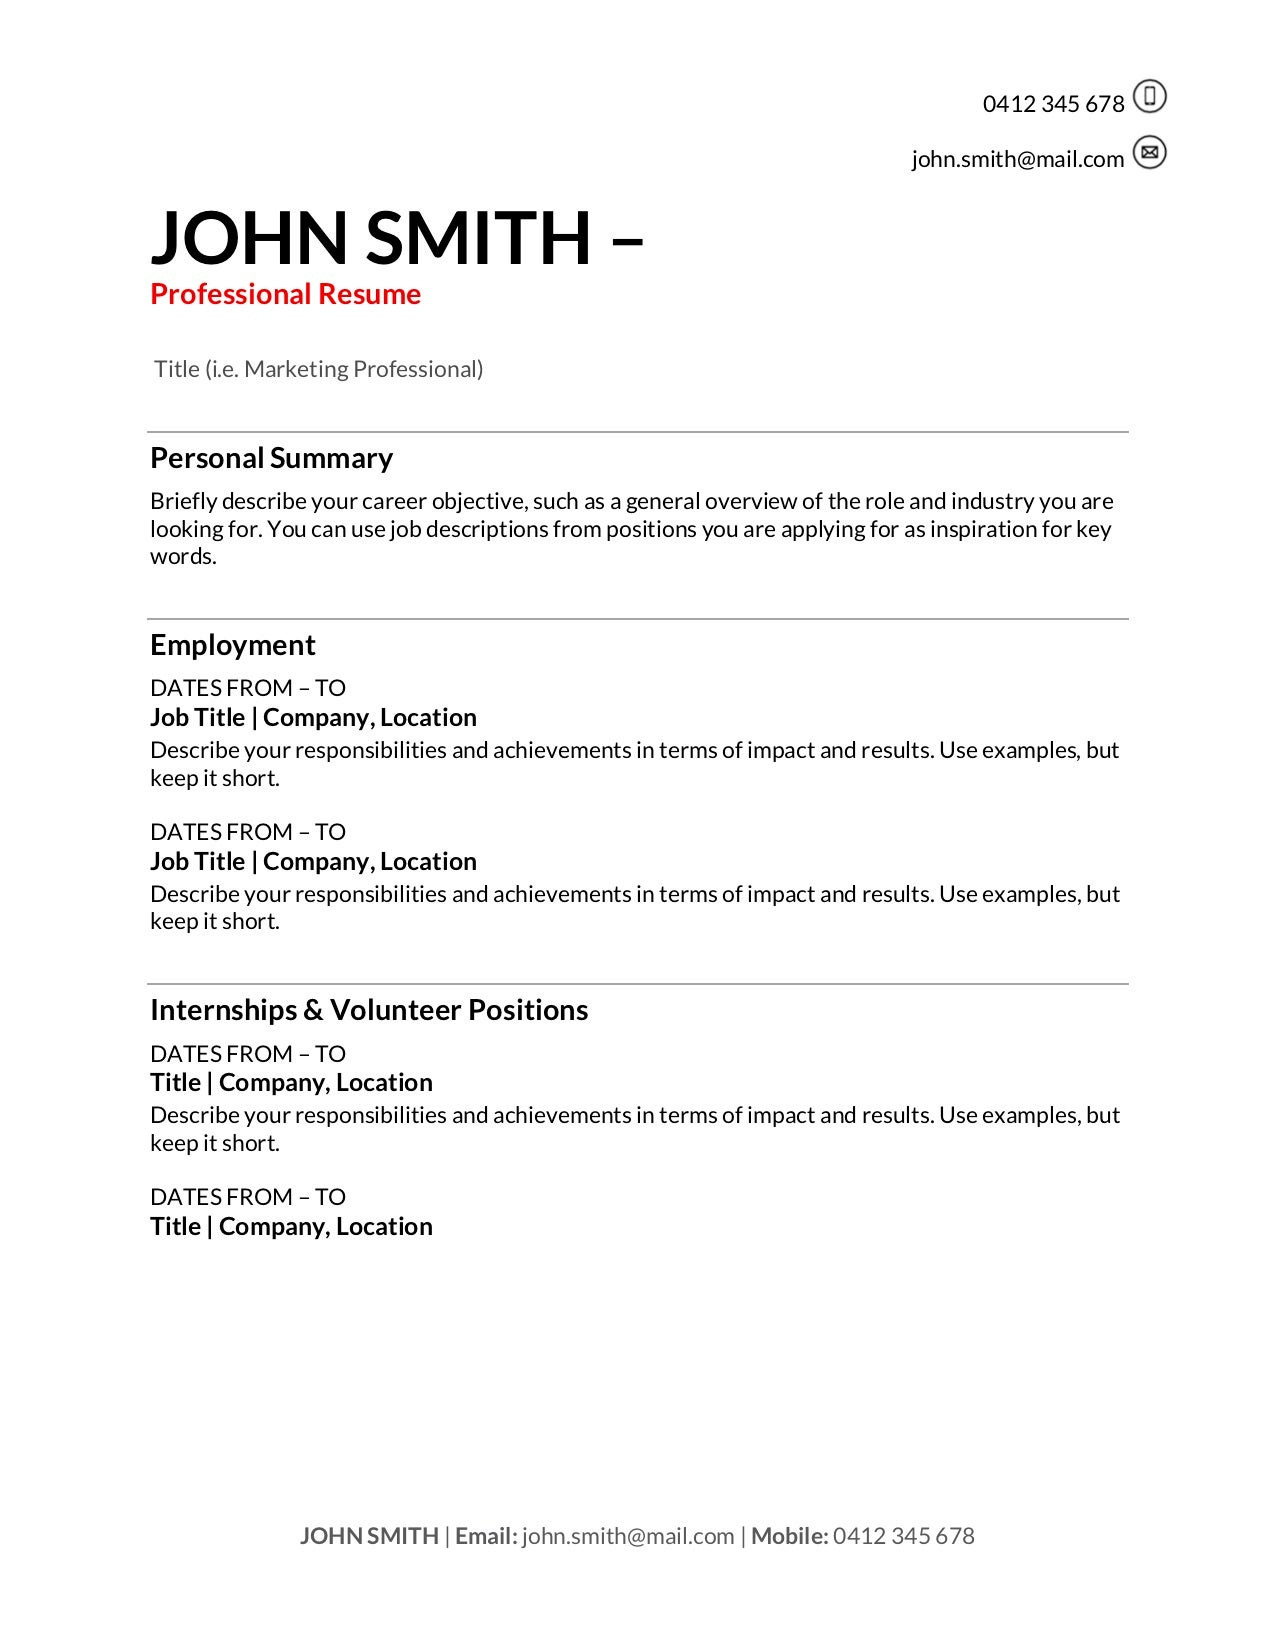 Sample Resumes for Jobs In Australia Free Resume Templates [download]: How to Write A Resume In 2022 …